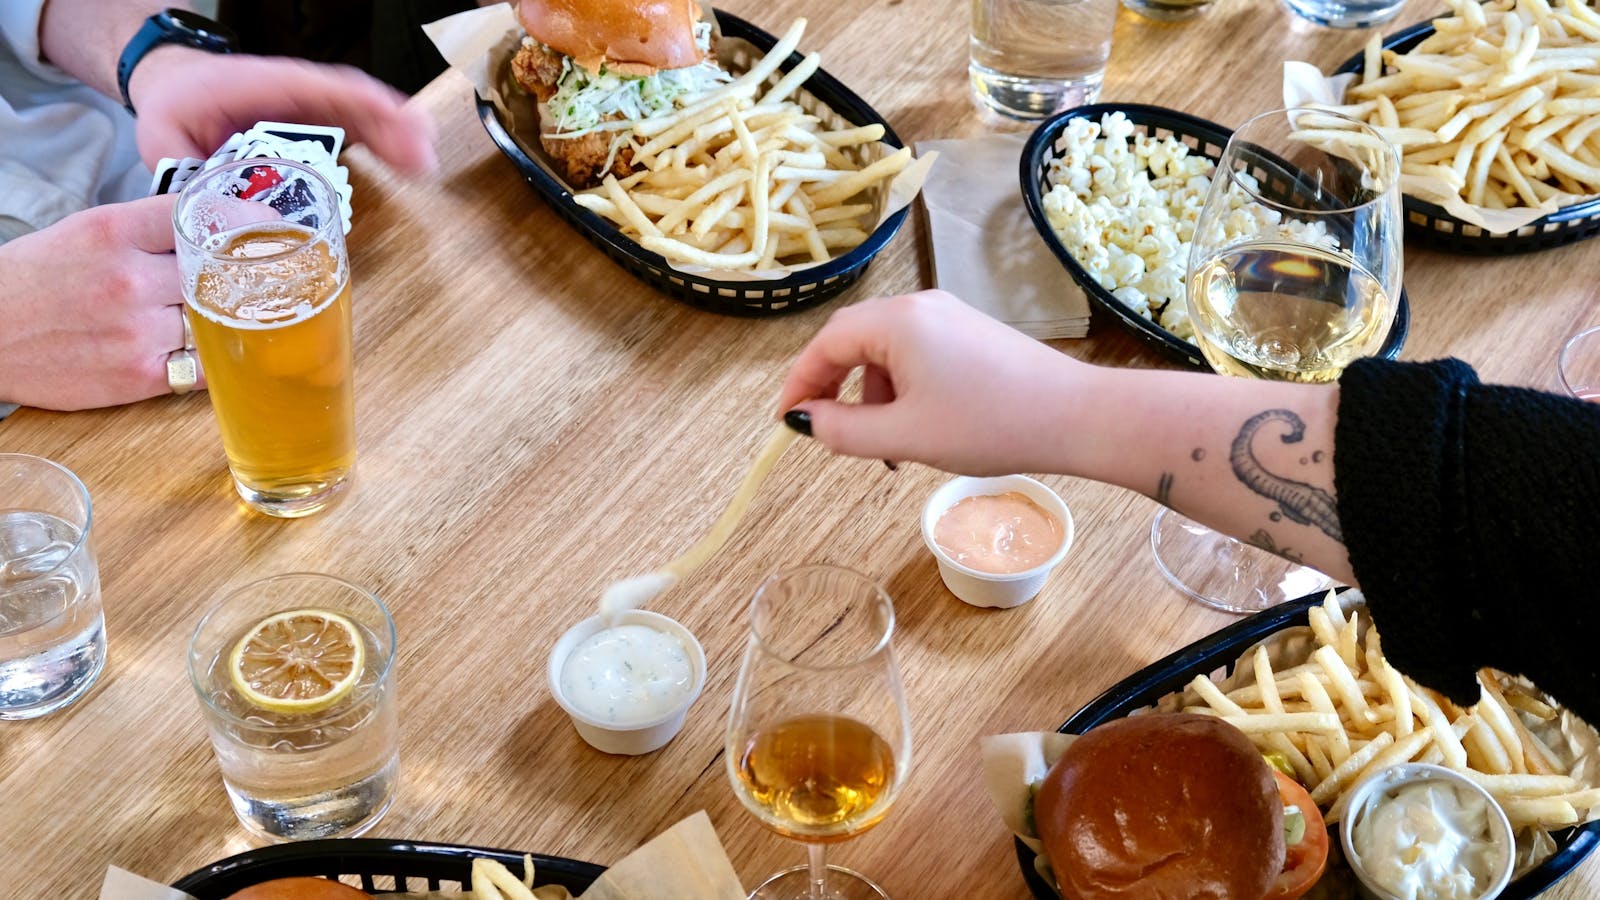 Bring the party and enjoy a session of boilermakers, burgers and a card game or two.